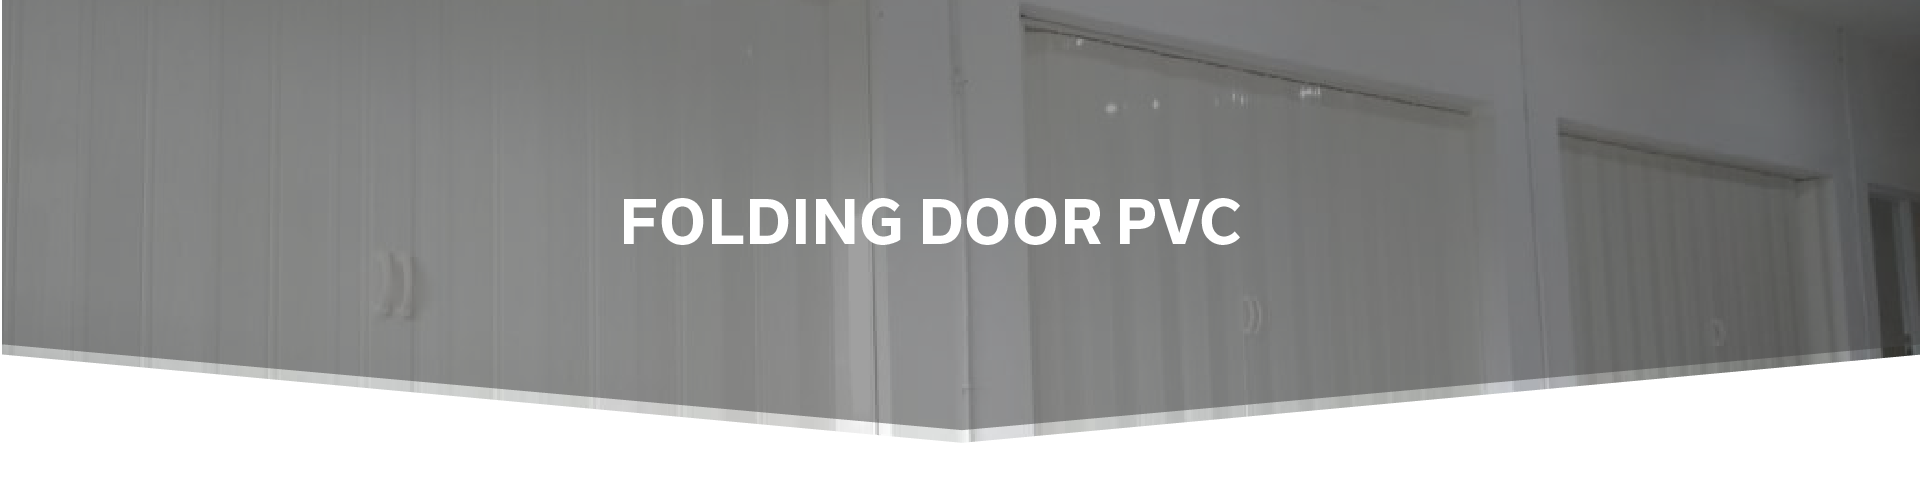 Folding Door PVC - title - by Halcyon Interior Supply